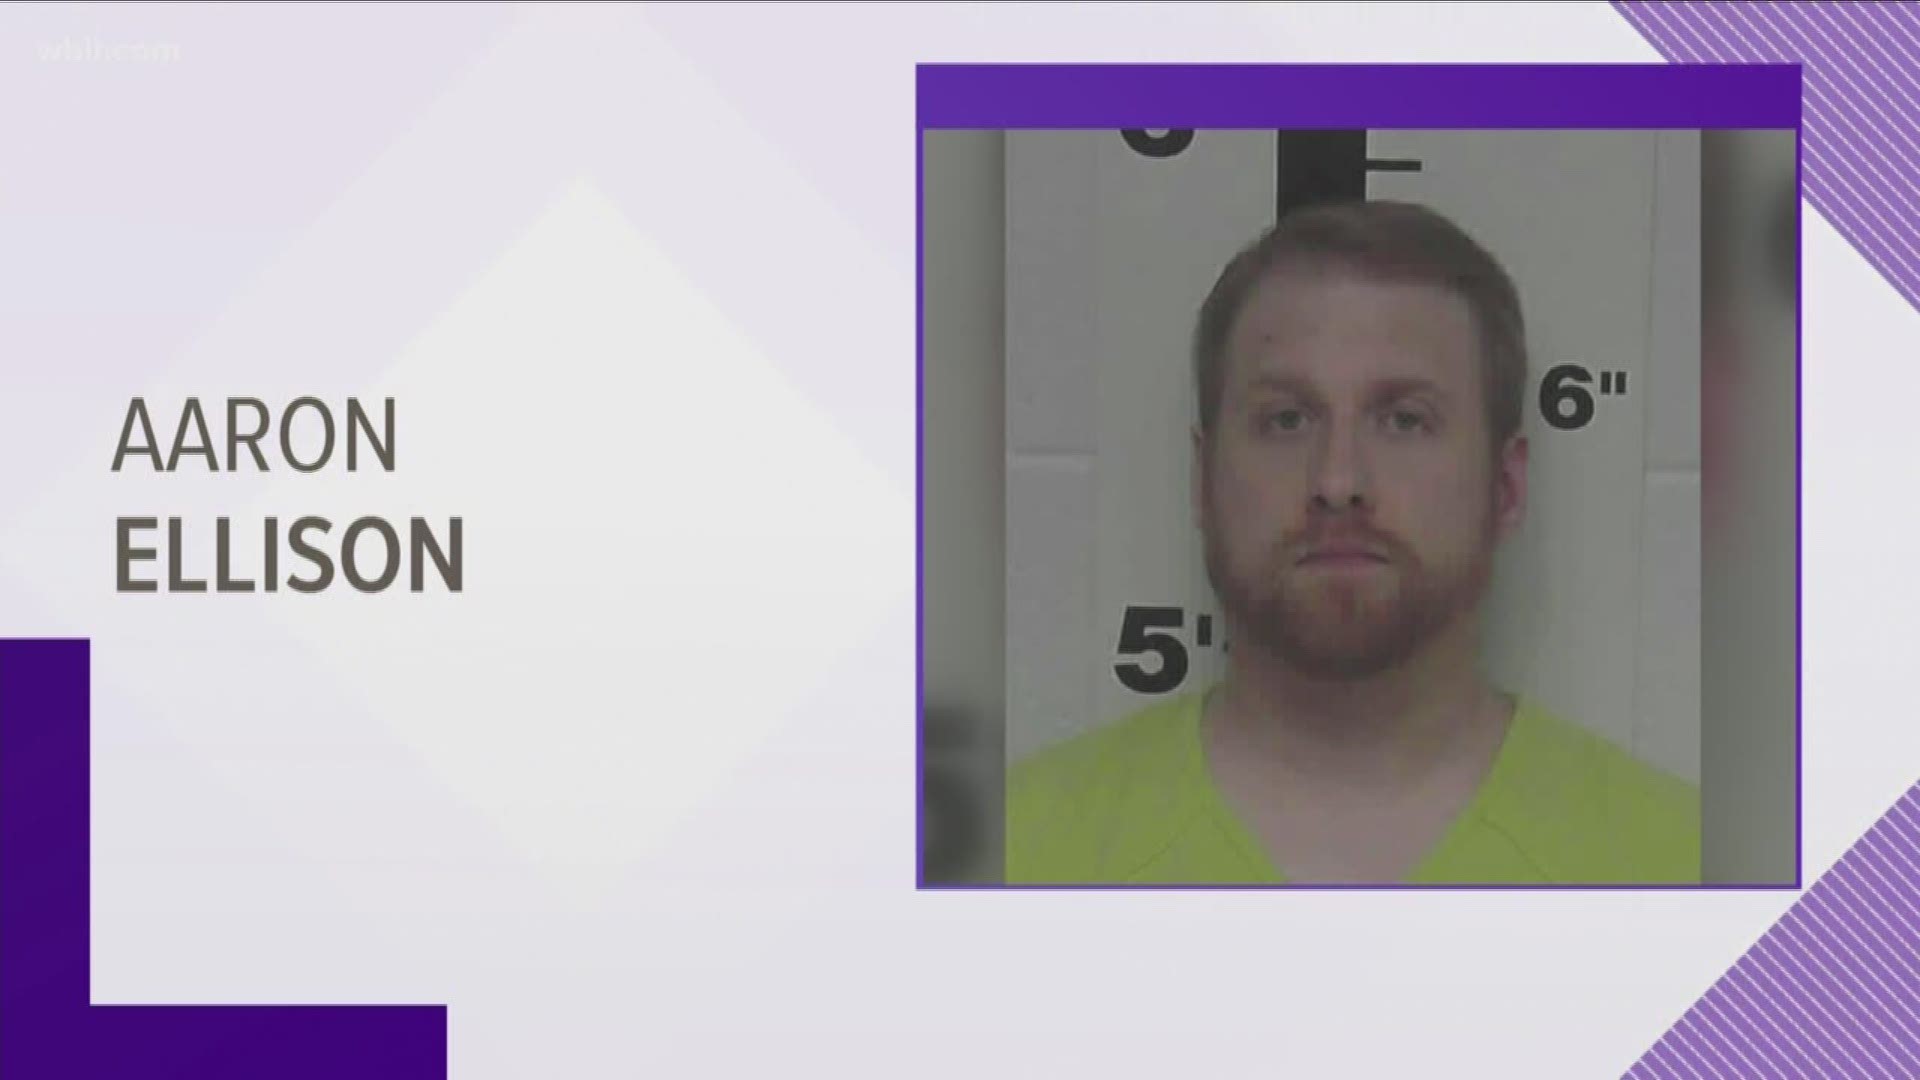 A Claiborne County teacher faces charges, accused of exchanging nude photos with a student.